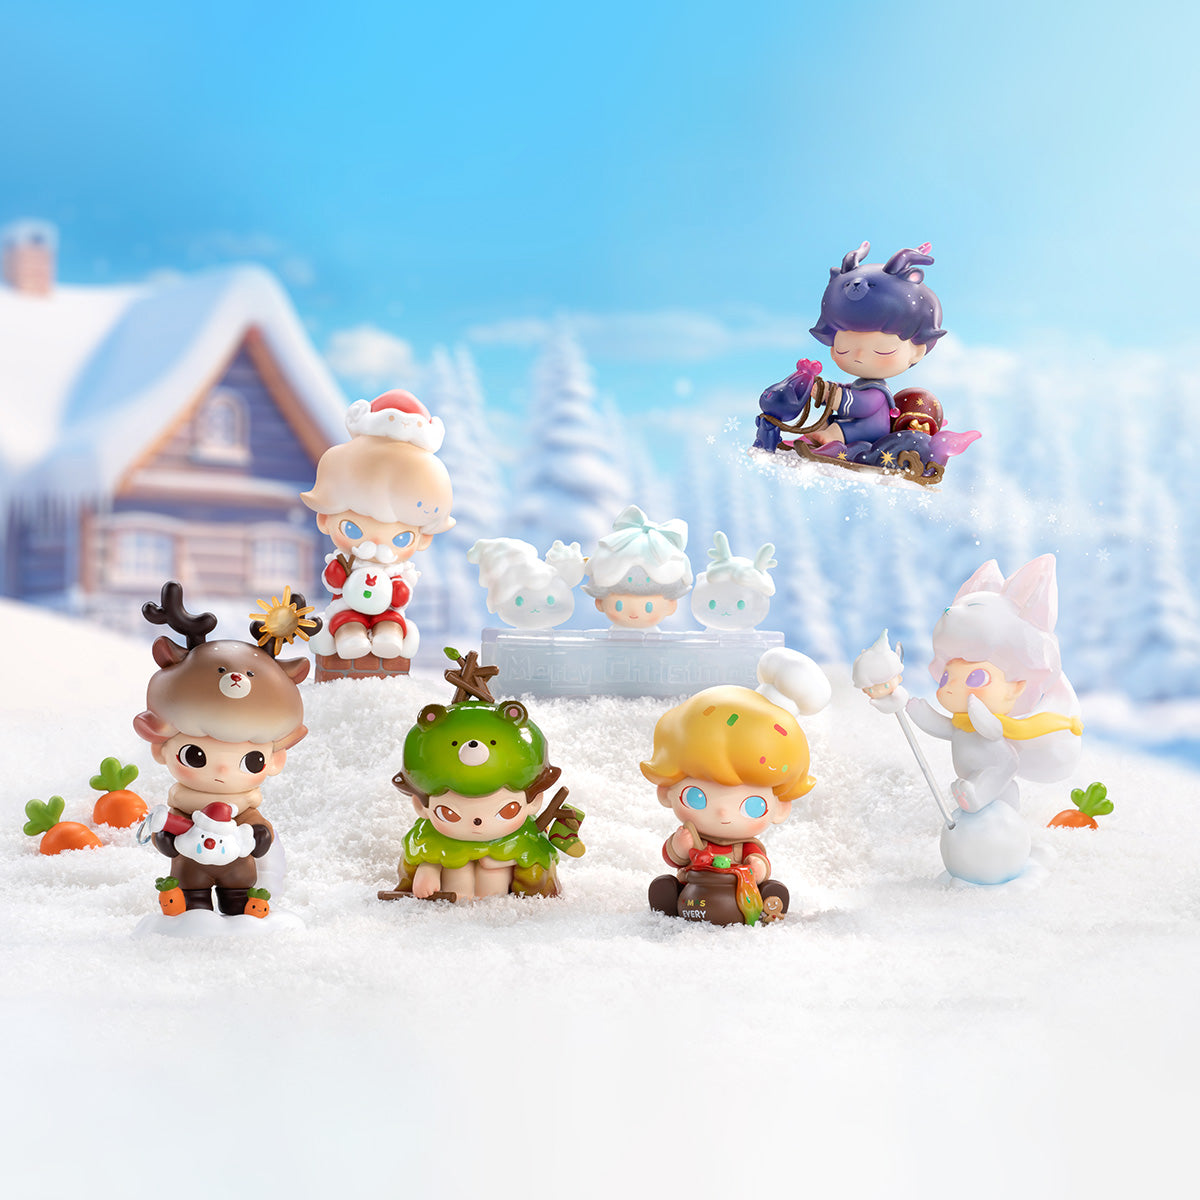 【XMAS】Pop Mart: DIMOO Letters From Snowman Blind